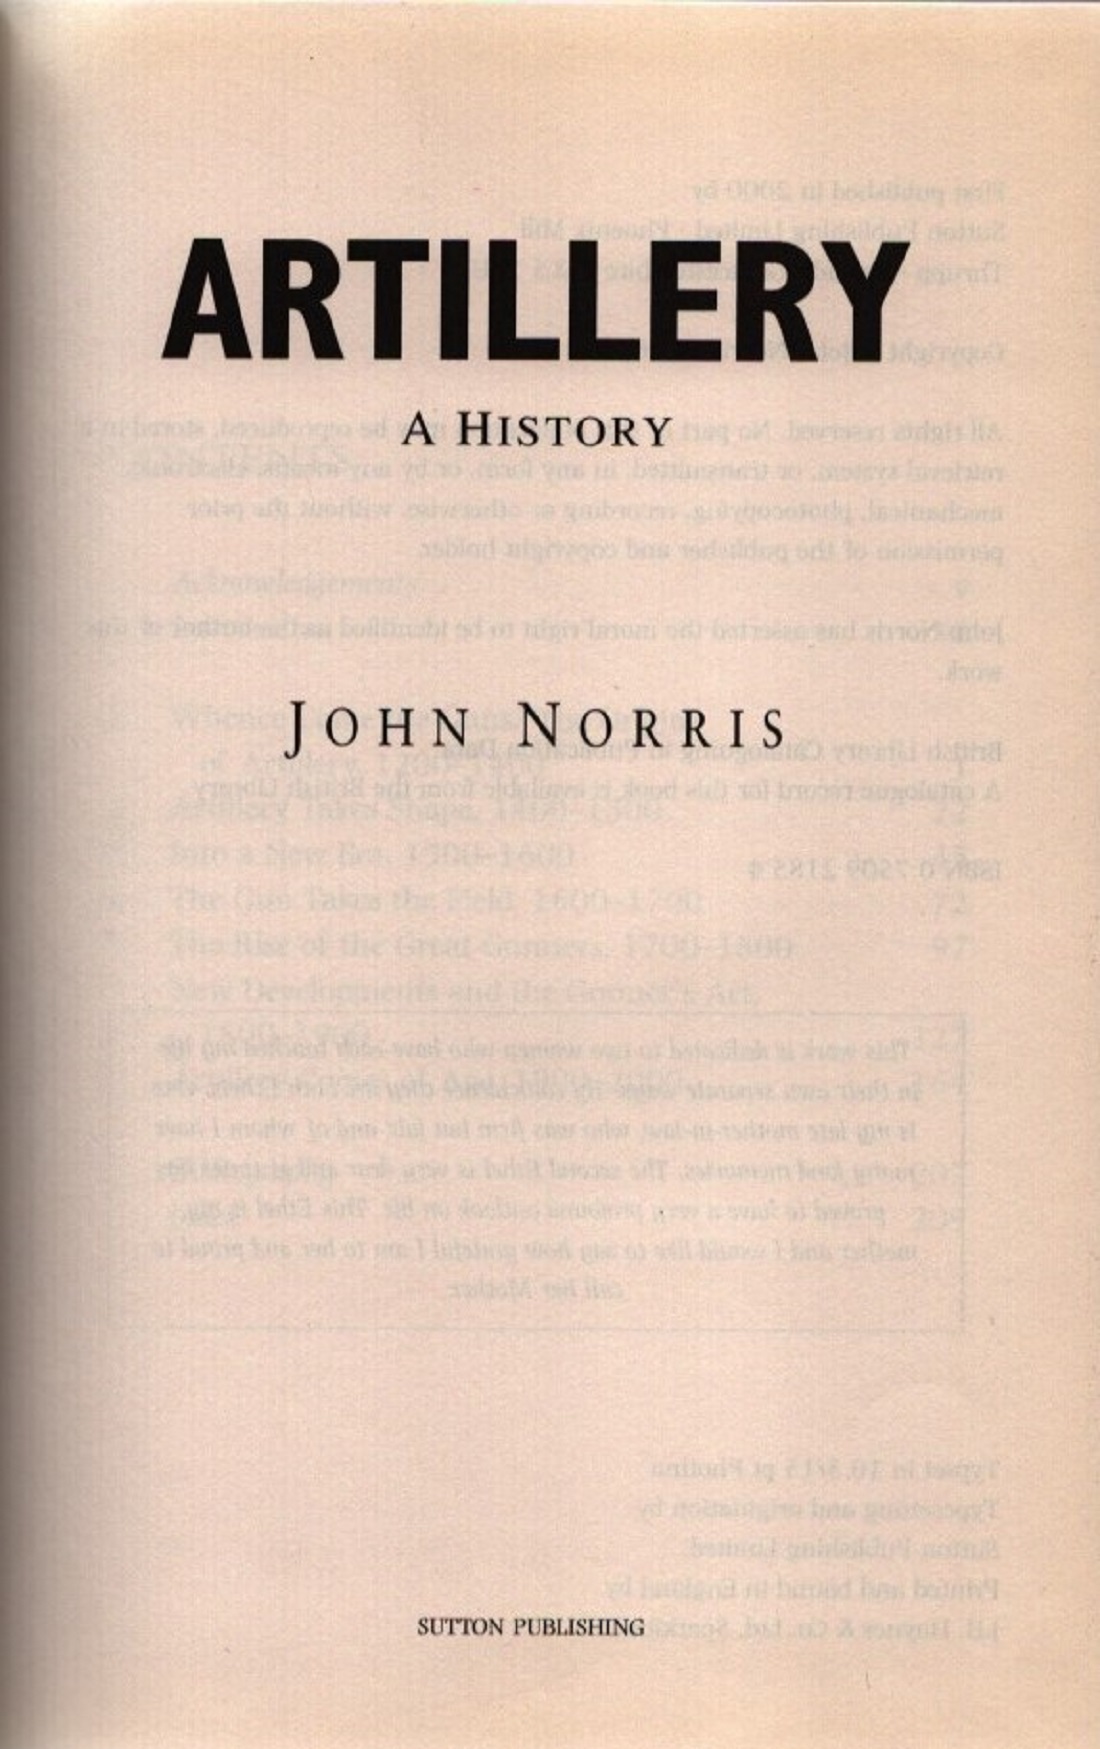 Artillery A History by John Norris unsigned Hardback book Dust Jacket. First published in 2000 by - Image 2 of 2